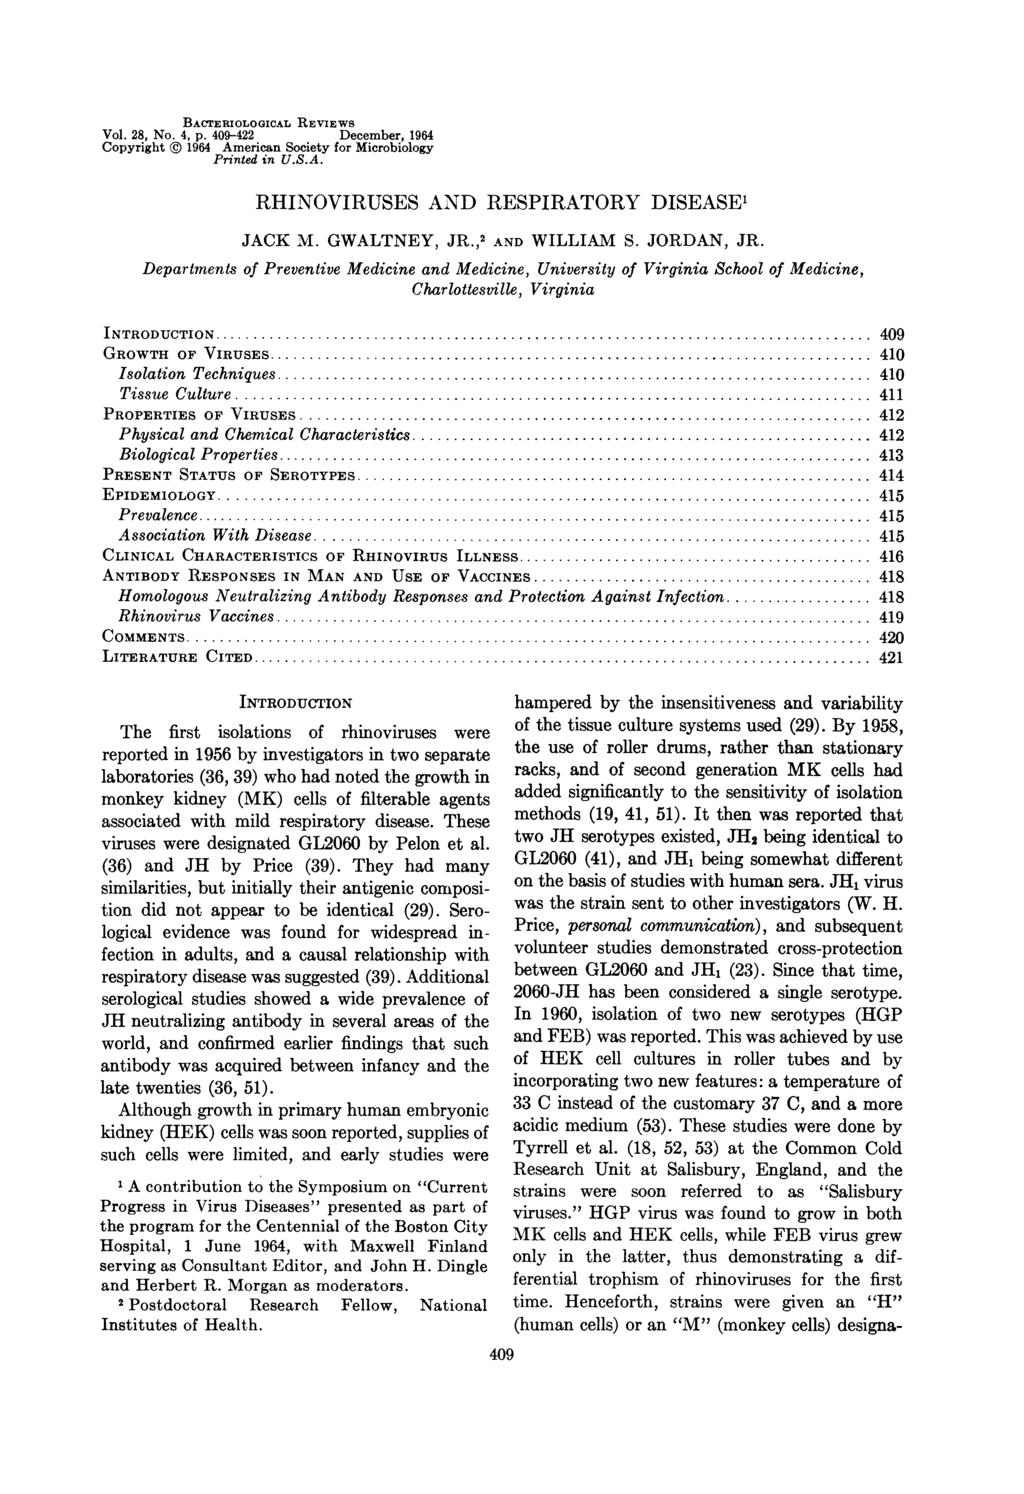 BACTERIOLOGICAL REVIEWS Vol. 28, 4, p. 409-422 December, 1964 Copyright 1964 American Society for Microbiology Printed in U.S.A. RHINOVIRUSES AND RESPIRATORY DISEASE' JACK M. GWALTNEY, JR.